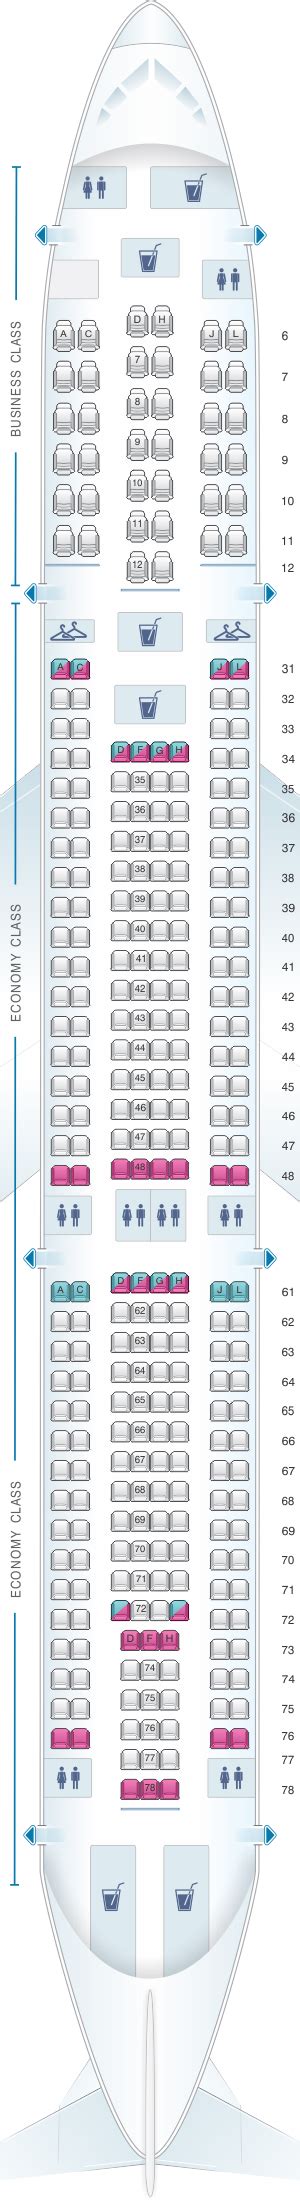 China Eastern Airlines A330 200 Seat Map Cabinets Matttroy